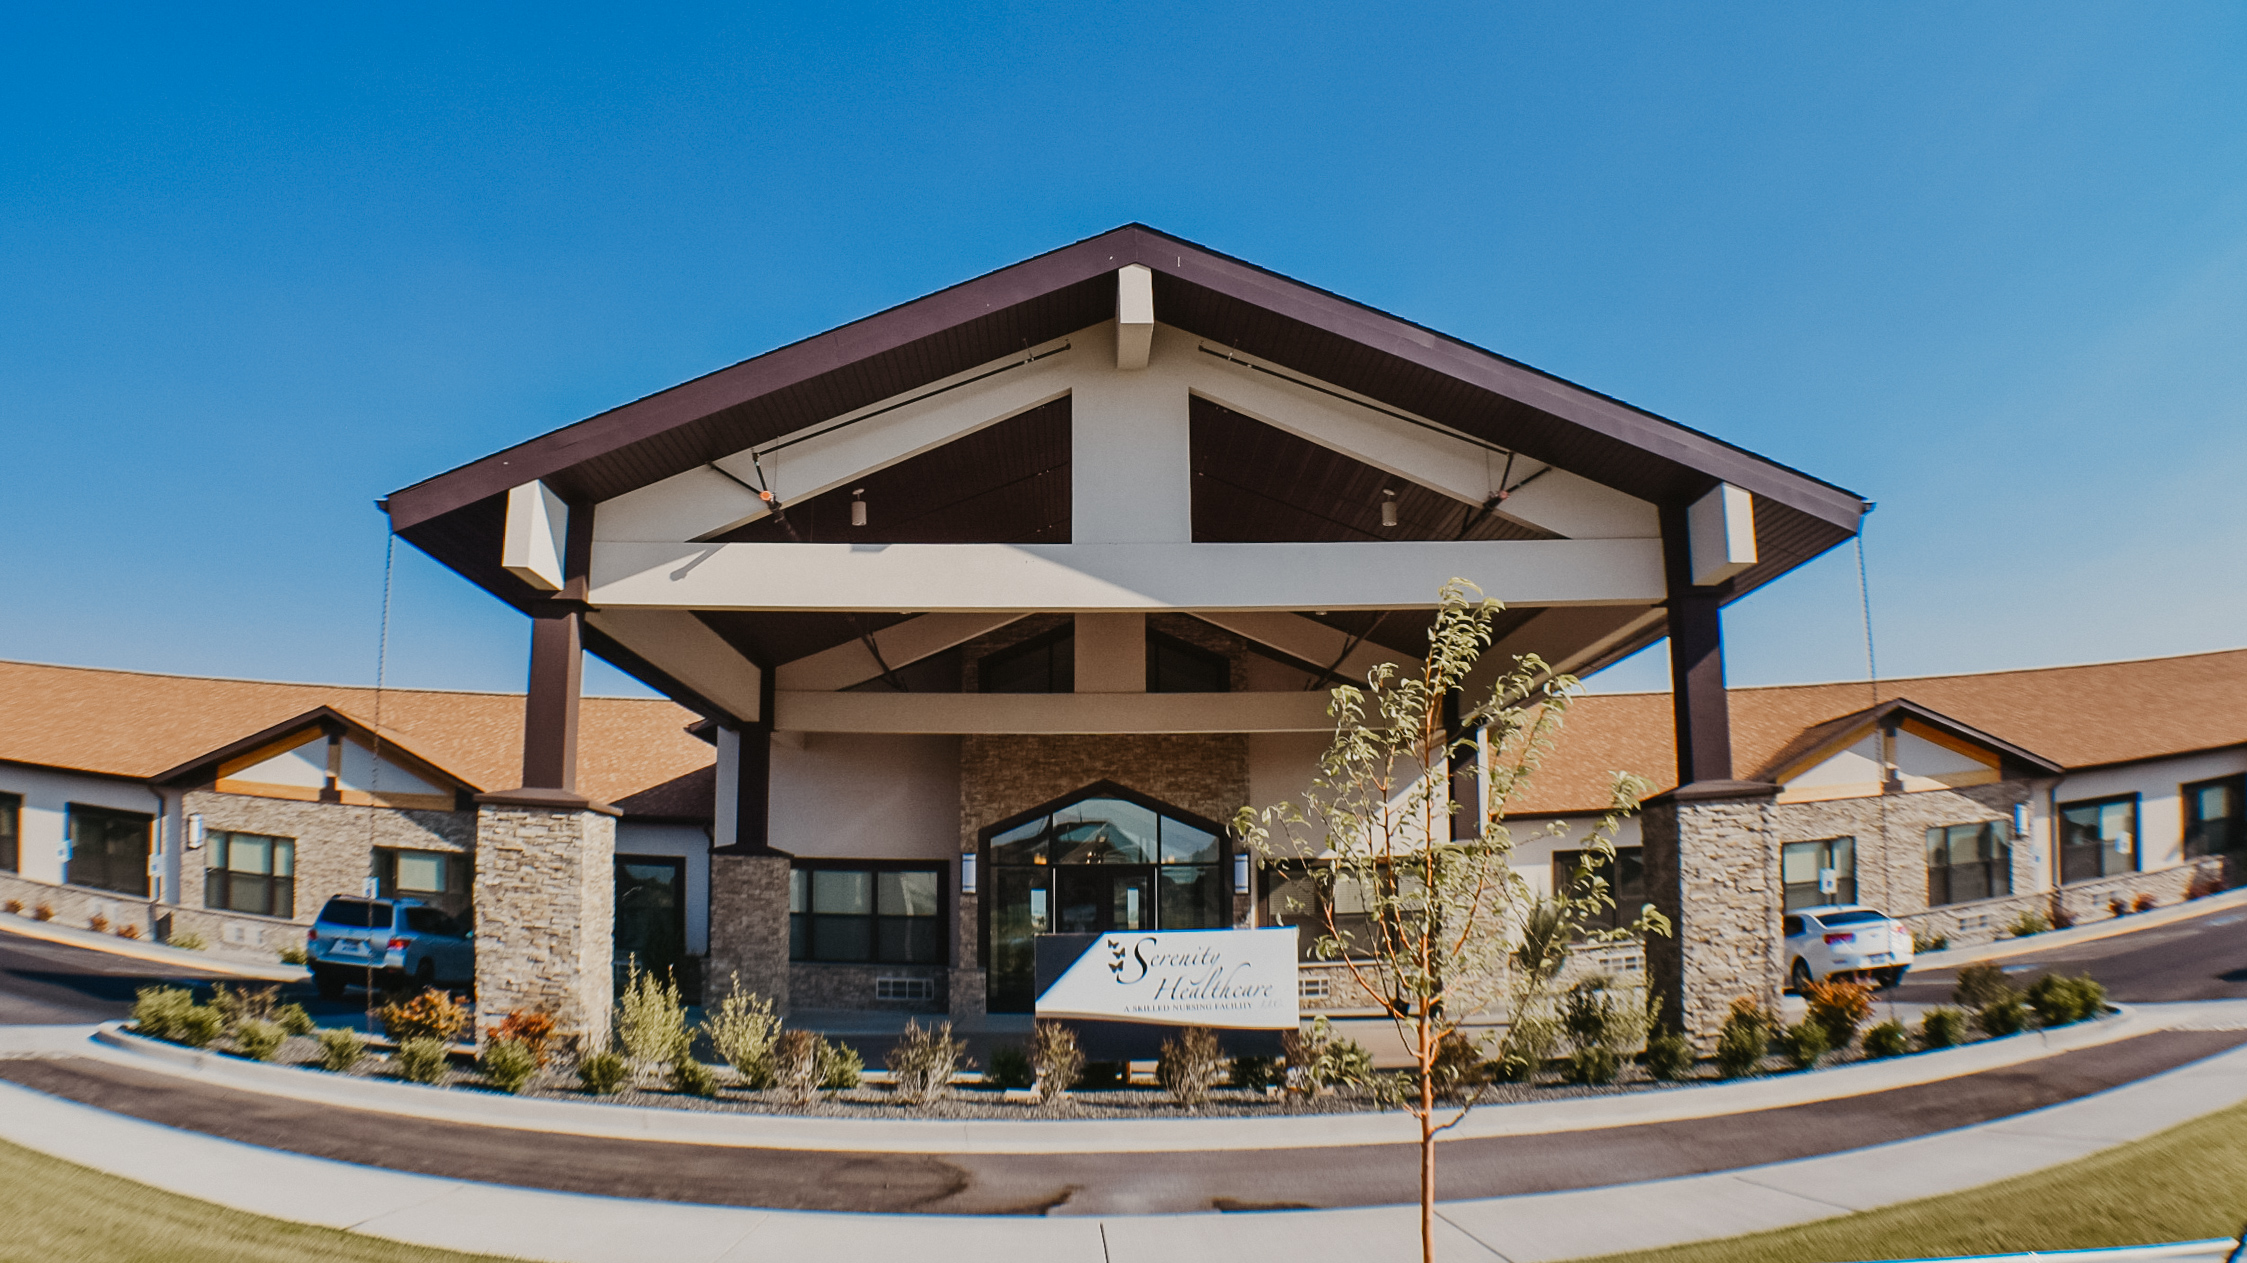 Serenity Transitional Care in Twin Falls, ID